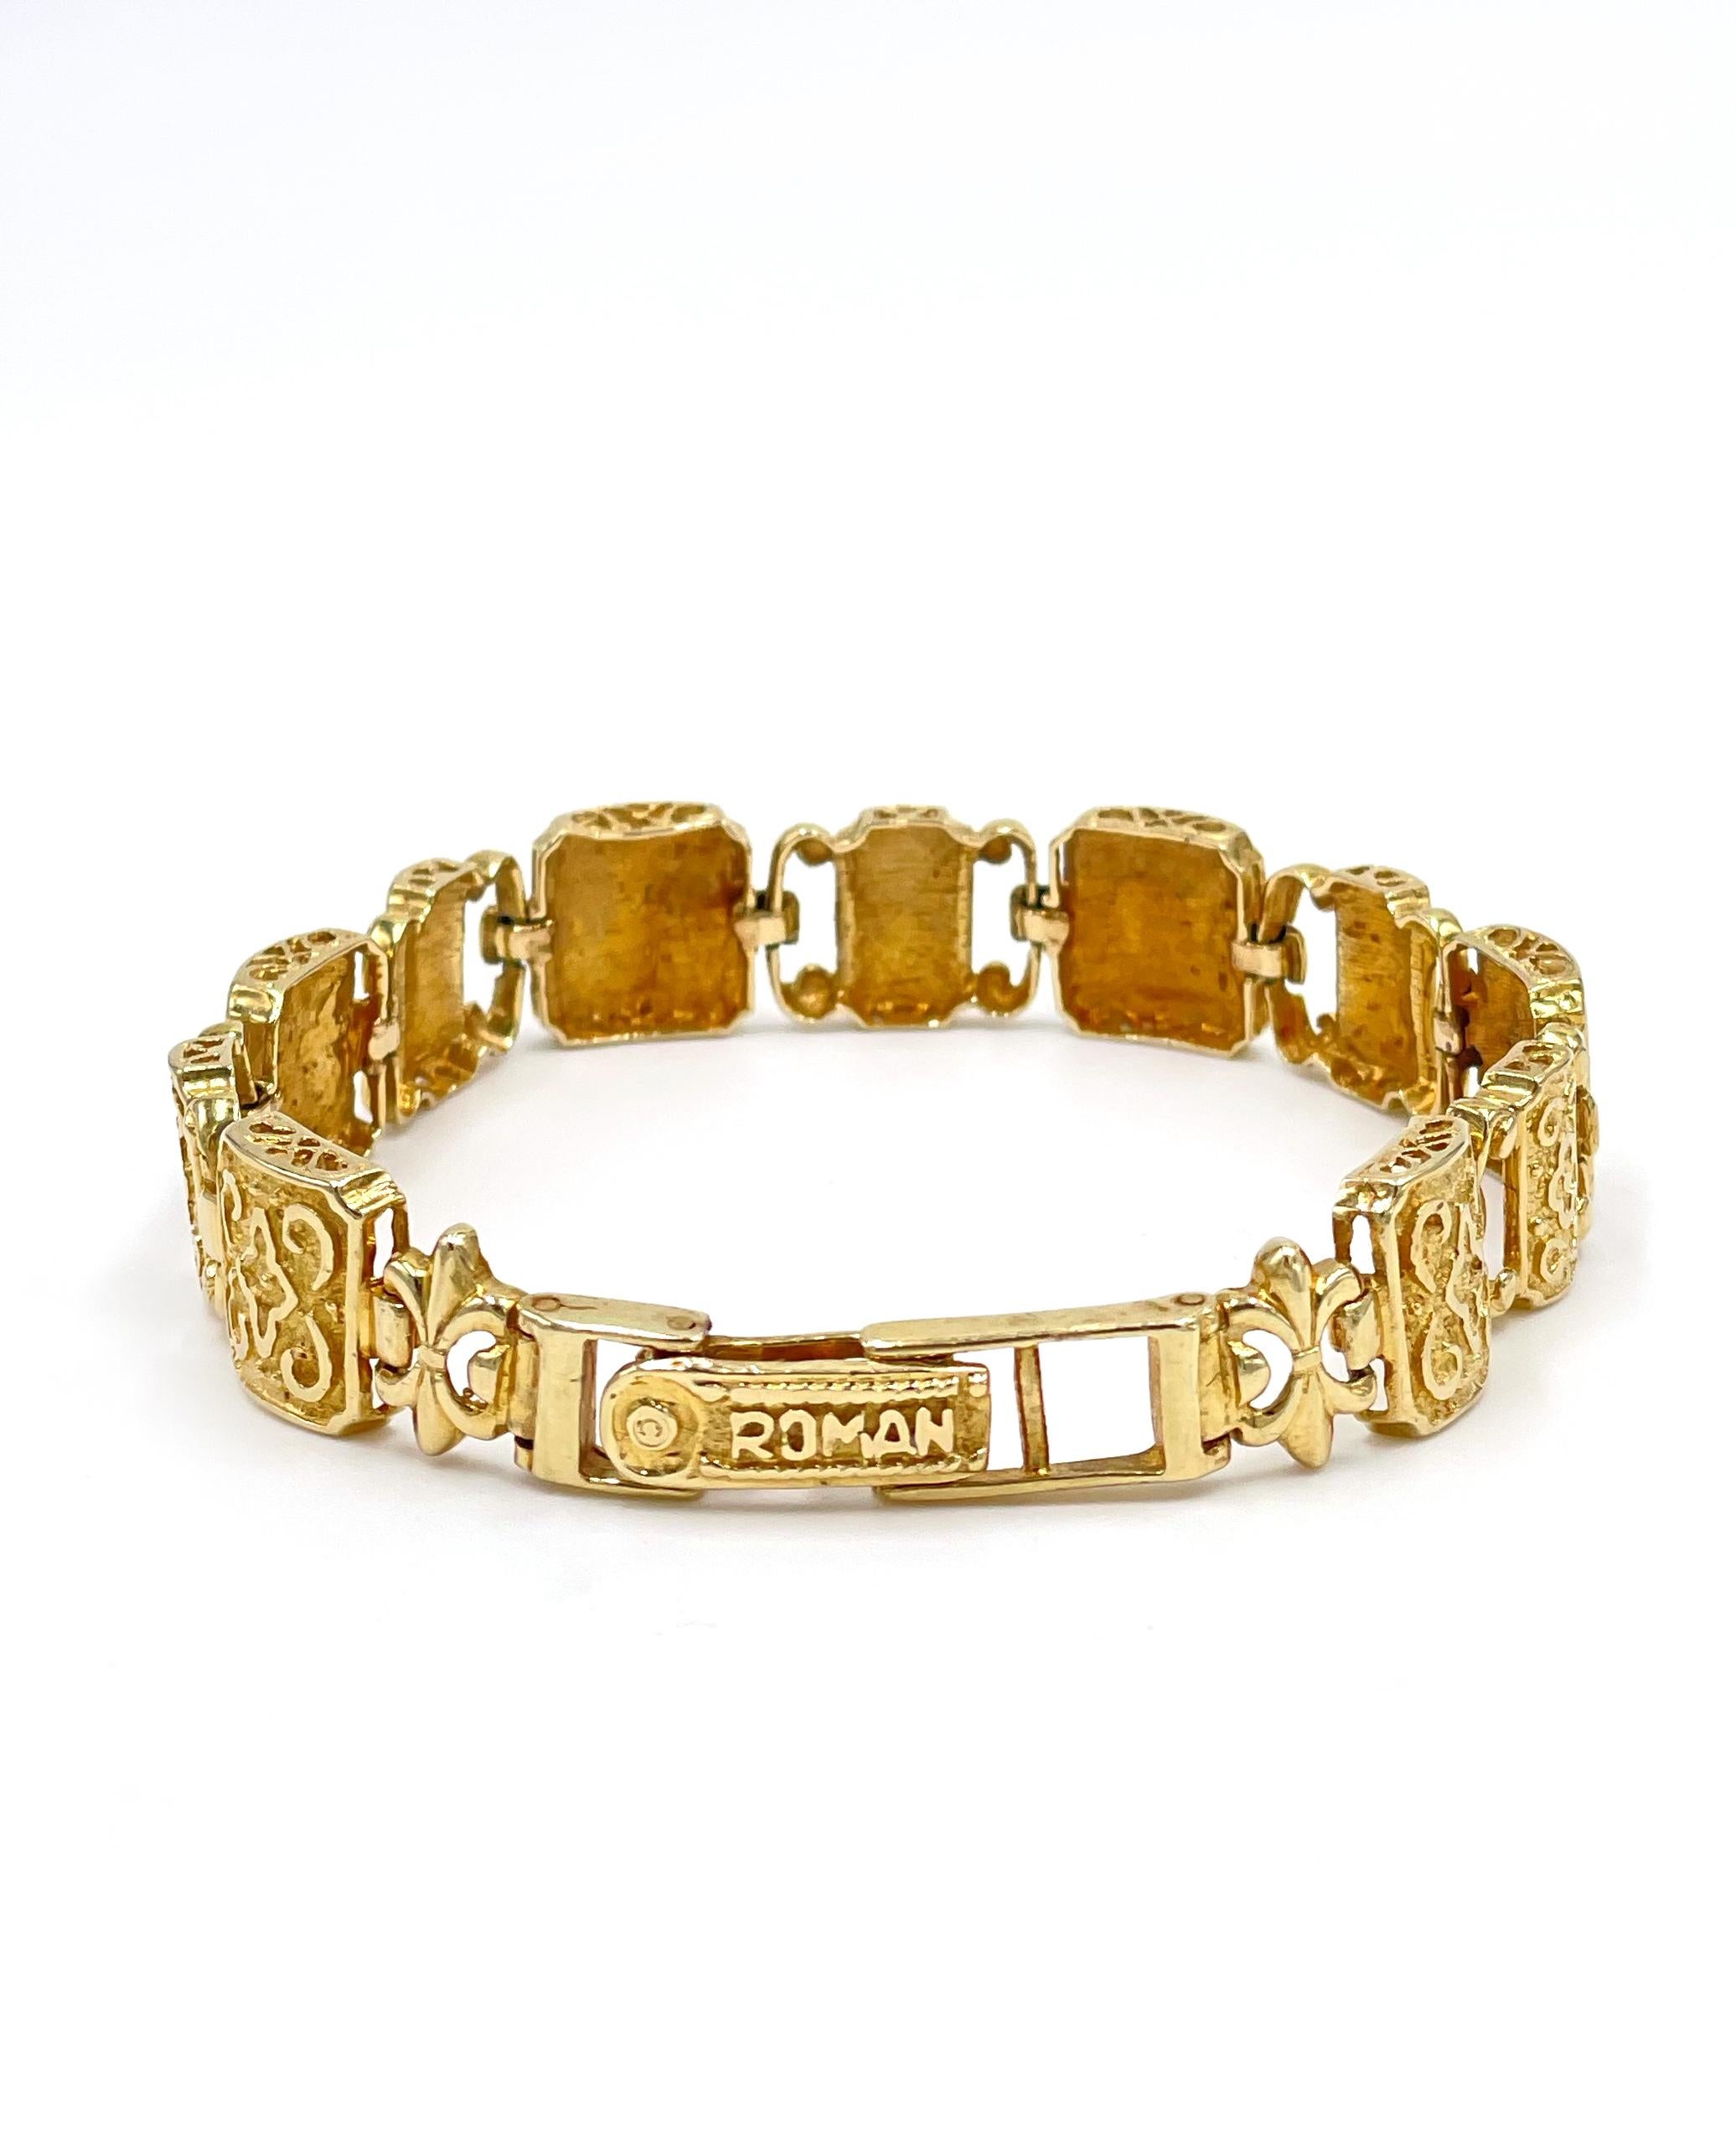 Preowned 14K yellow gold square link bracelet with modern Byzantine design. 

* 7 inches long
* 17.5 grams 
* 11mm wide
* Stamped 